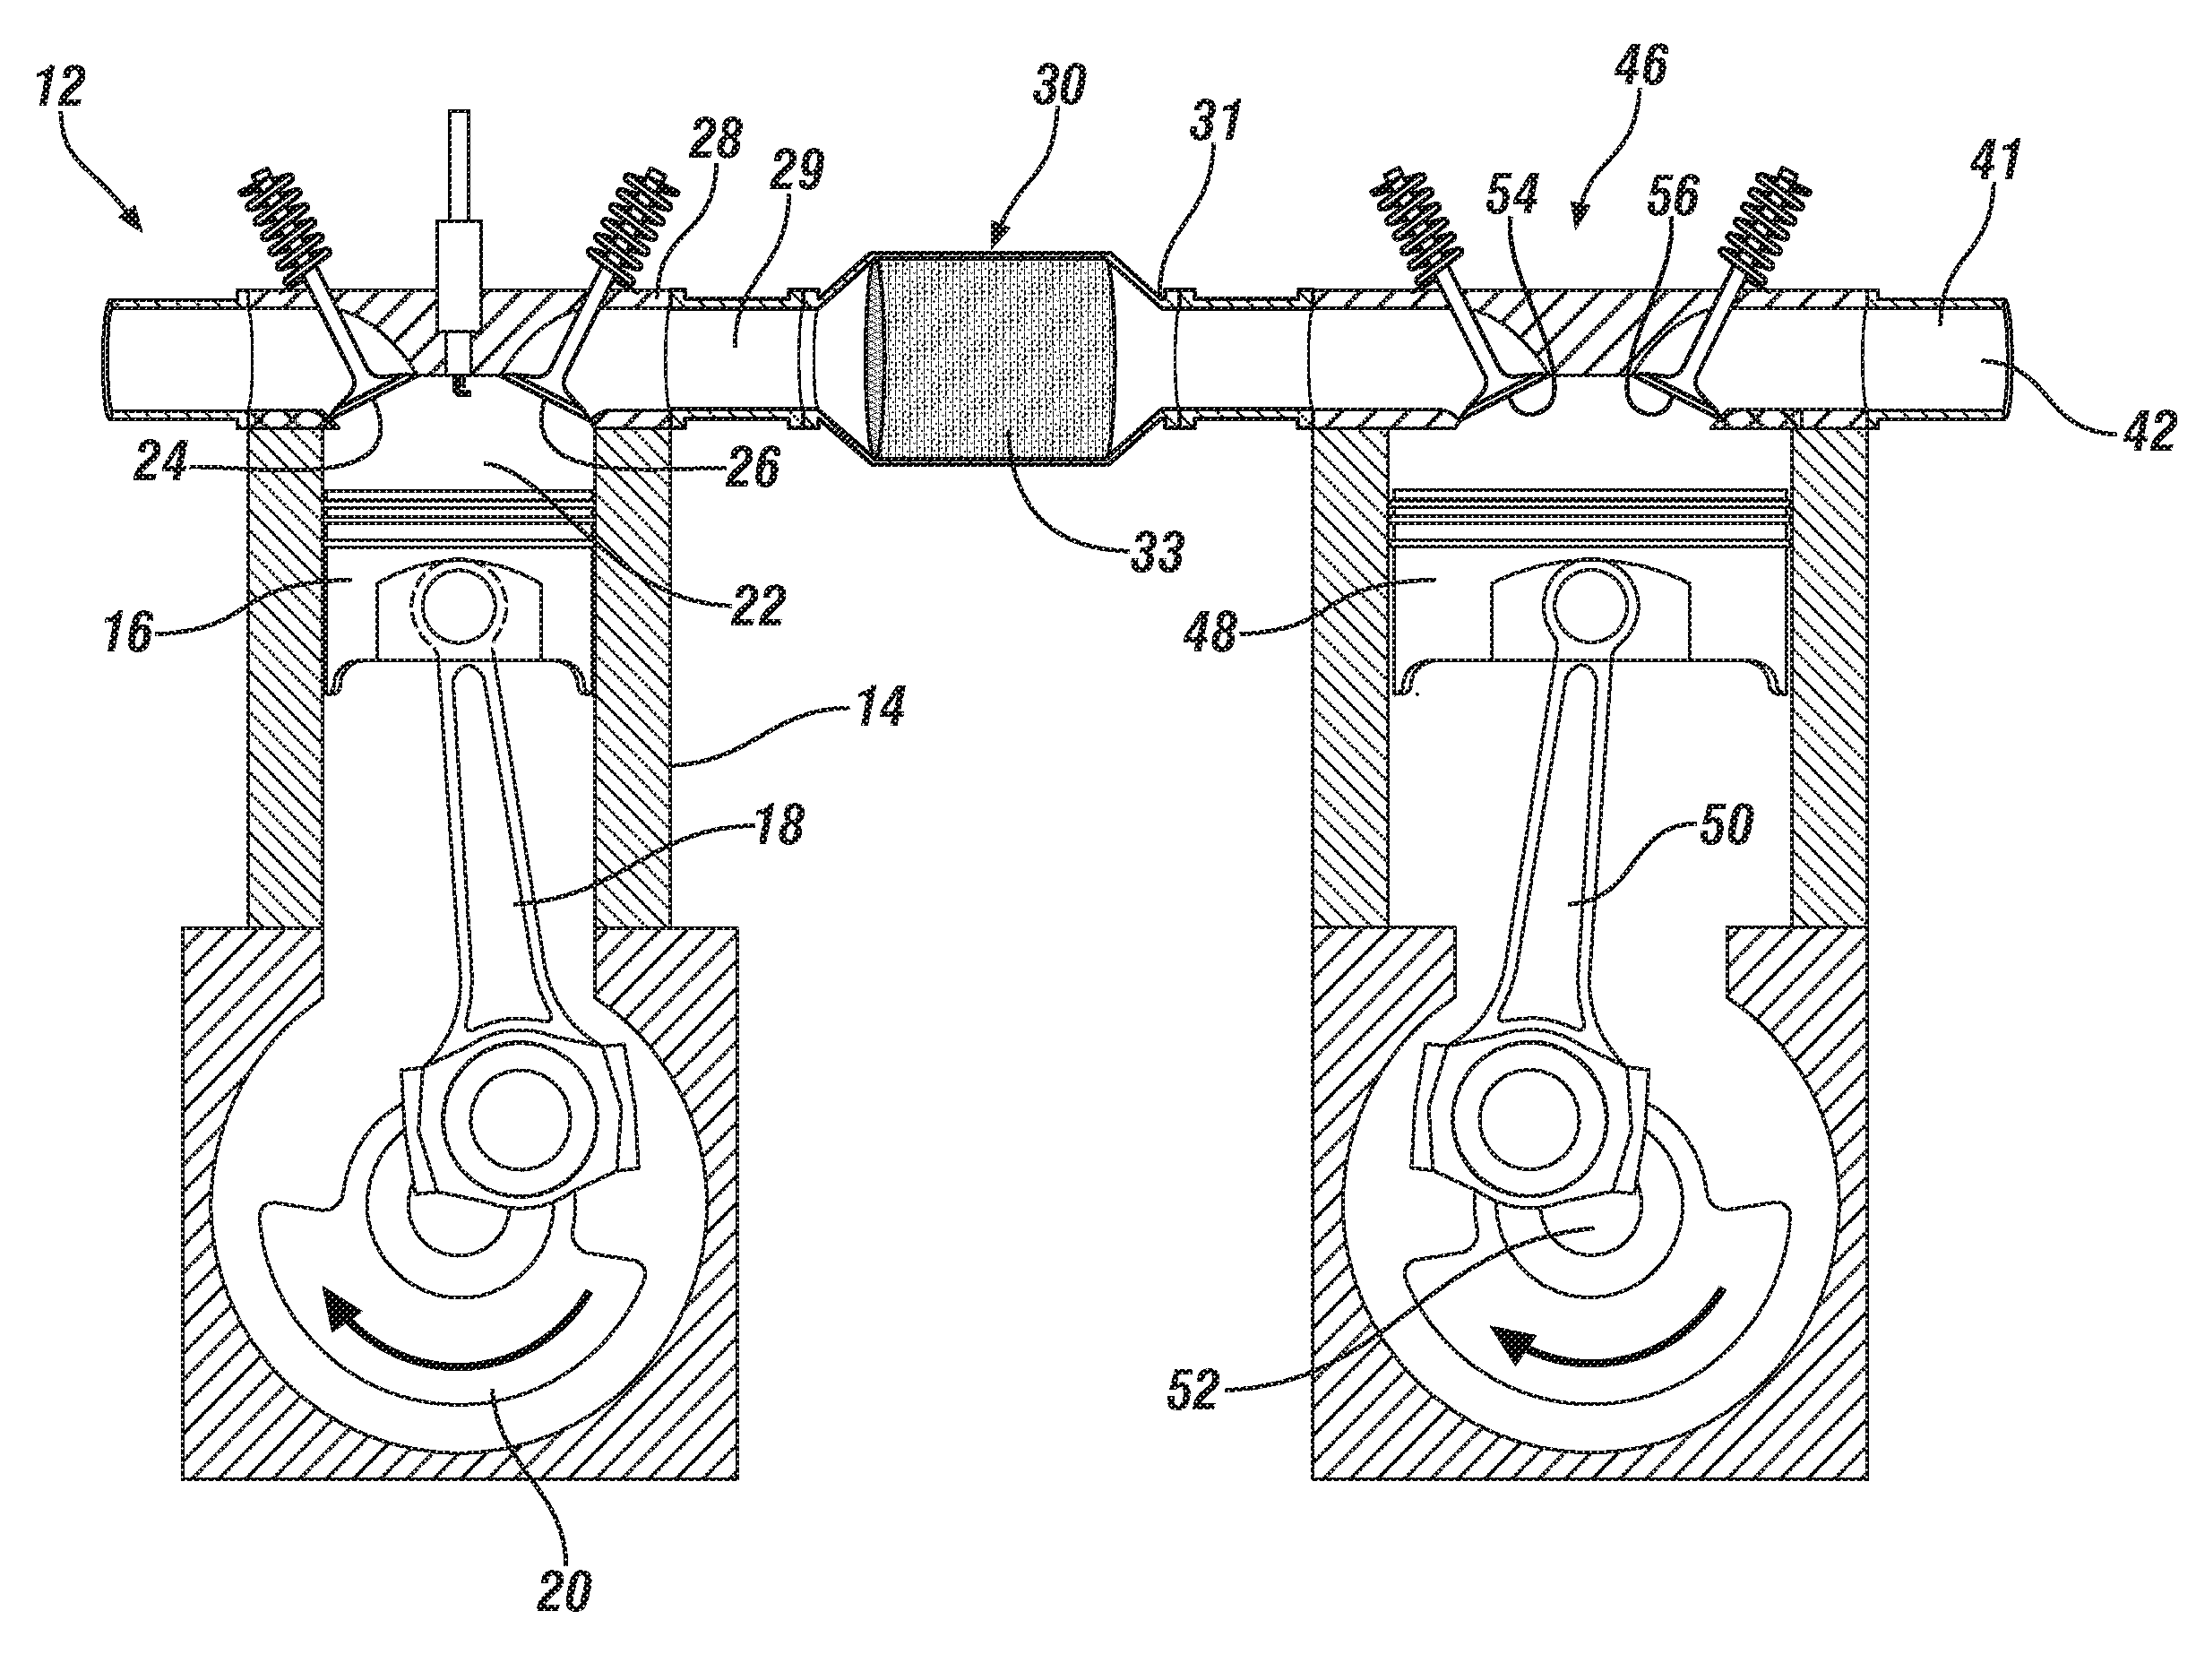 Internal combustion engine with emission treatment interposed between two expansion phases